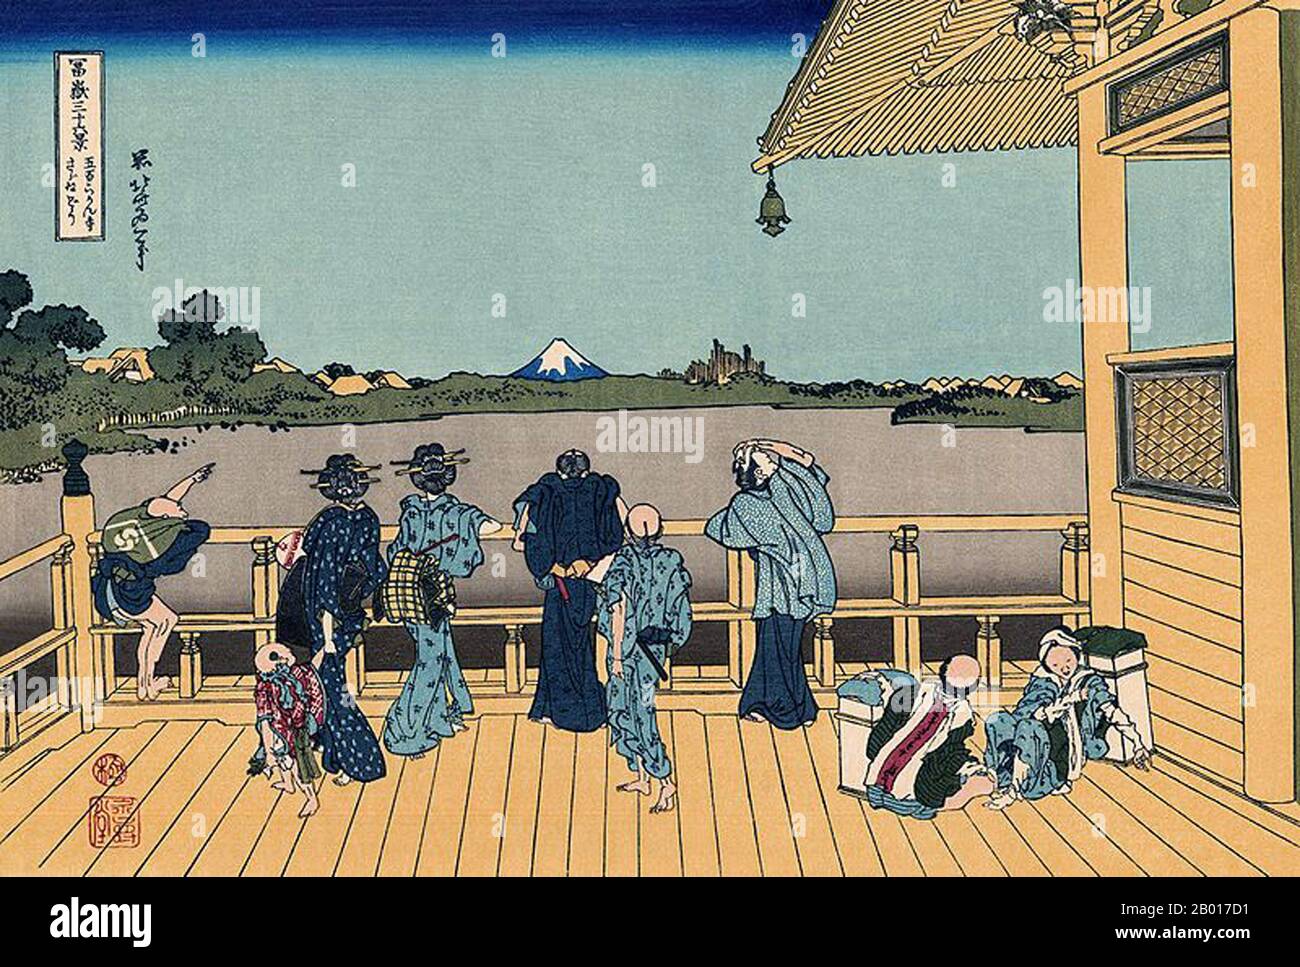 Japan: ‘Sazai Hall - Temple of Five Hundred Rakan’. Ukiyo-e woodblock print from the series ‘Thirty-Six Views of Mount Fuji’ by Katsushika Hokusai (31 October 1760 - 10 May 1849), 1830.  ‘Thirty-six Views of Mount Fuji’ is an ‘ukiyo-e’ series of woodcut prints by Japanese artist Katsushika Hokusai. The series depicts Mount Fuji in differing seasons and weather conditions from a variety of places and distances. It actually consists of 46 prints created between 1826 and 1833. The first 36 were included in the original publication and, due to their popularity, 10 more were added. Stock Photo